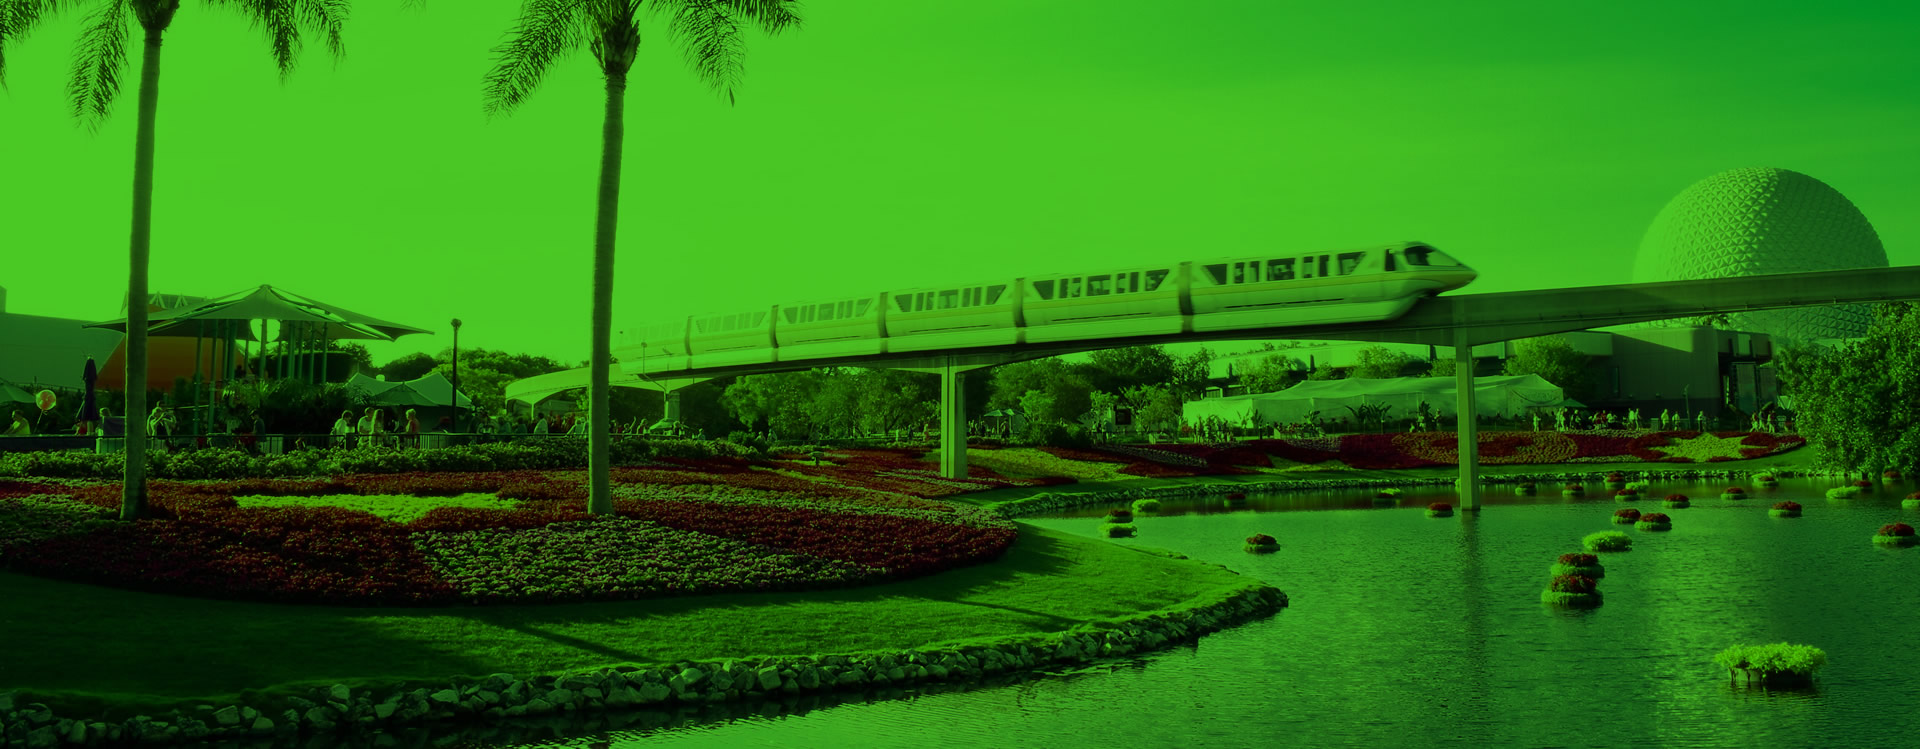 Monorail speeding by on elevated tracks in Disney near a flower garden and pond, with the Epcot dome in the background